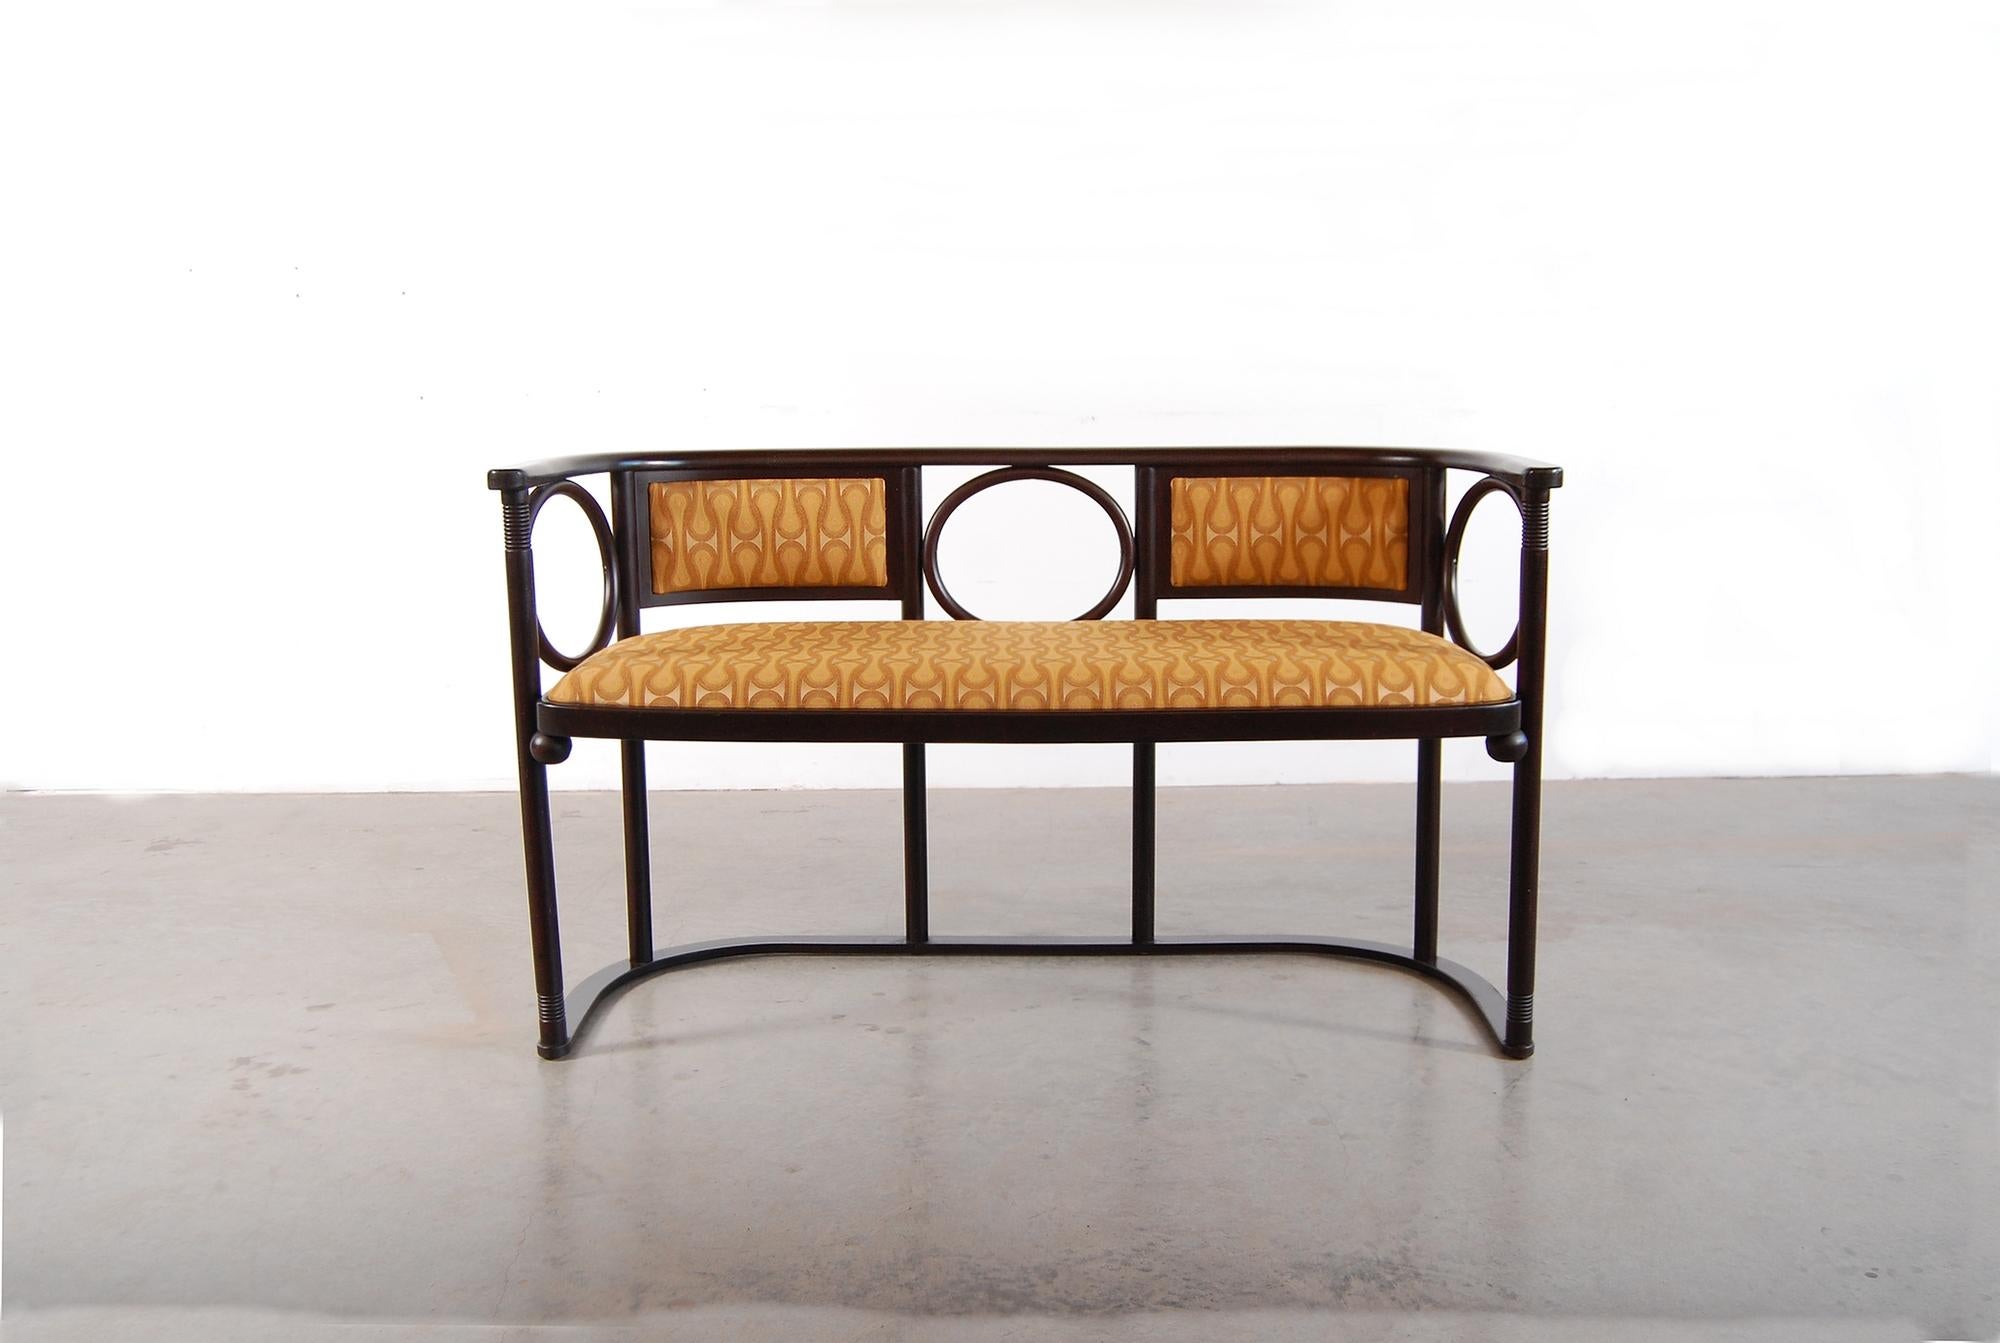 Josef Hoffman bench, designed circa 1905. This example, produced in Austrian by Wittmann in the 1980s. Newly upholstered in fabric that was designed by Josef Hoffmann, circa 1908, and recently re-produced by Maharam.